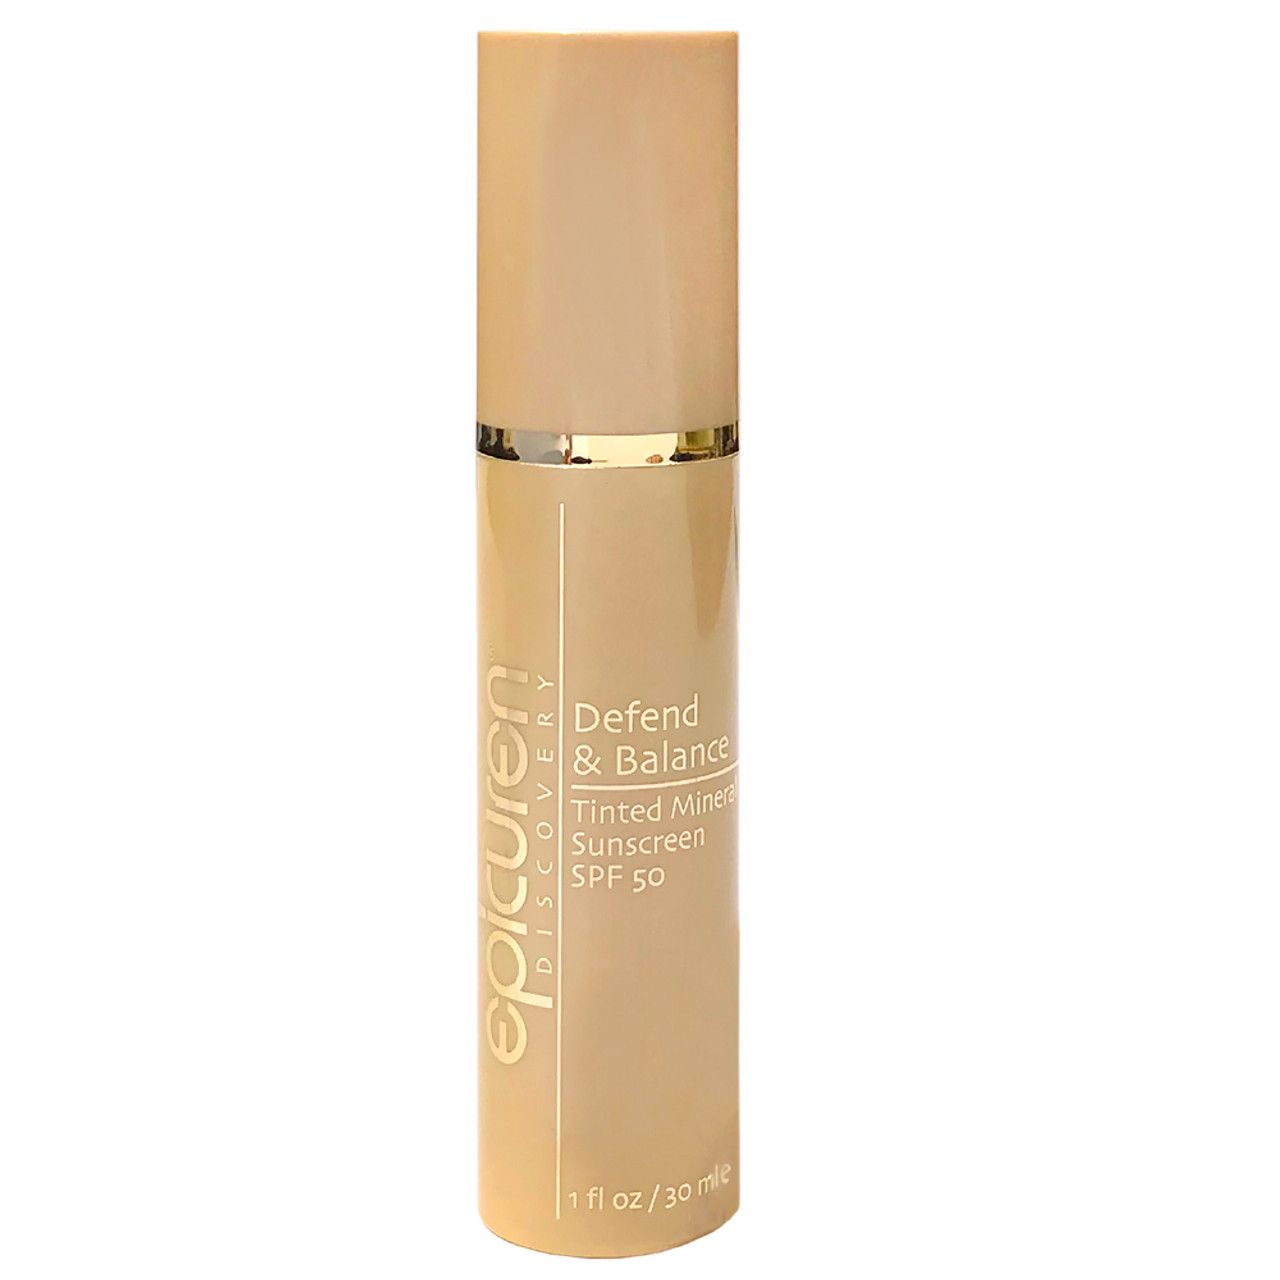 epicuren Discovery Defend and Balance Tinted Mineral Sunscreen SPF 50 BeautifiedYou.com